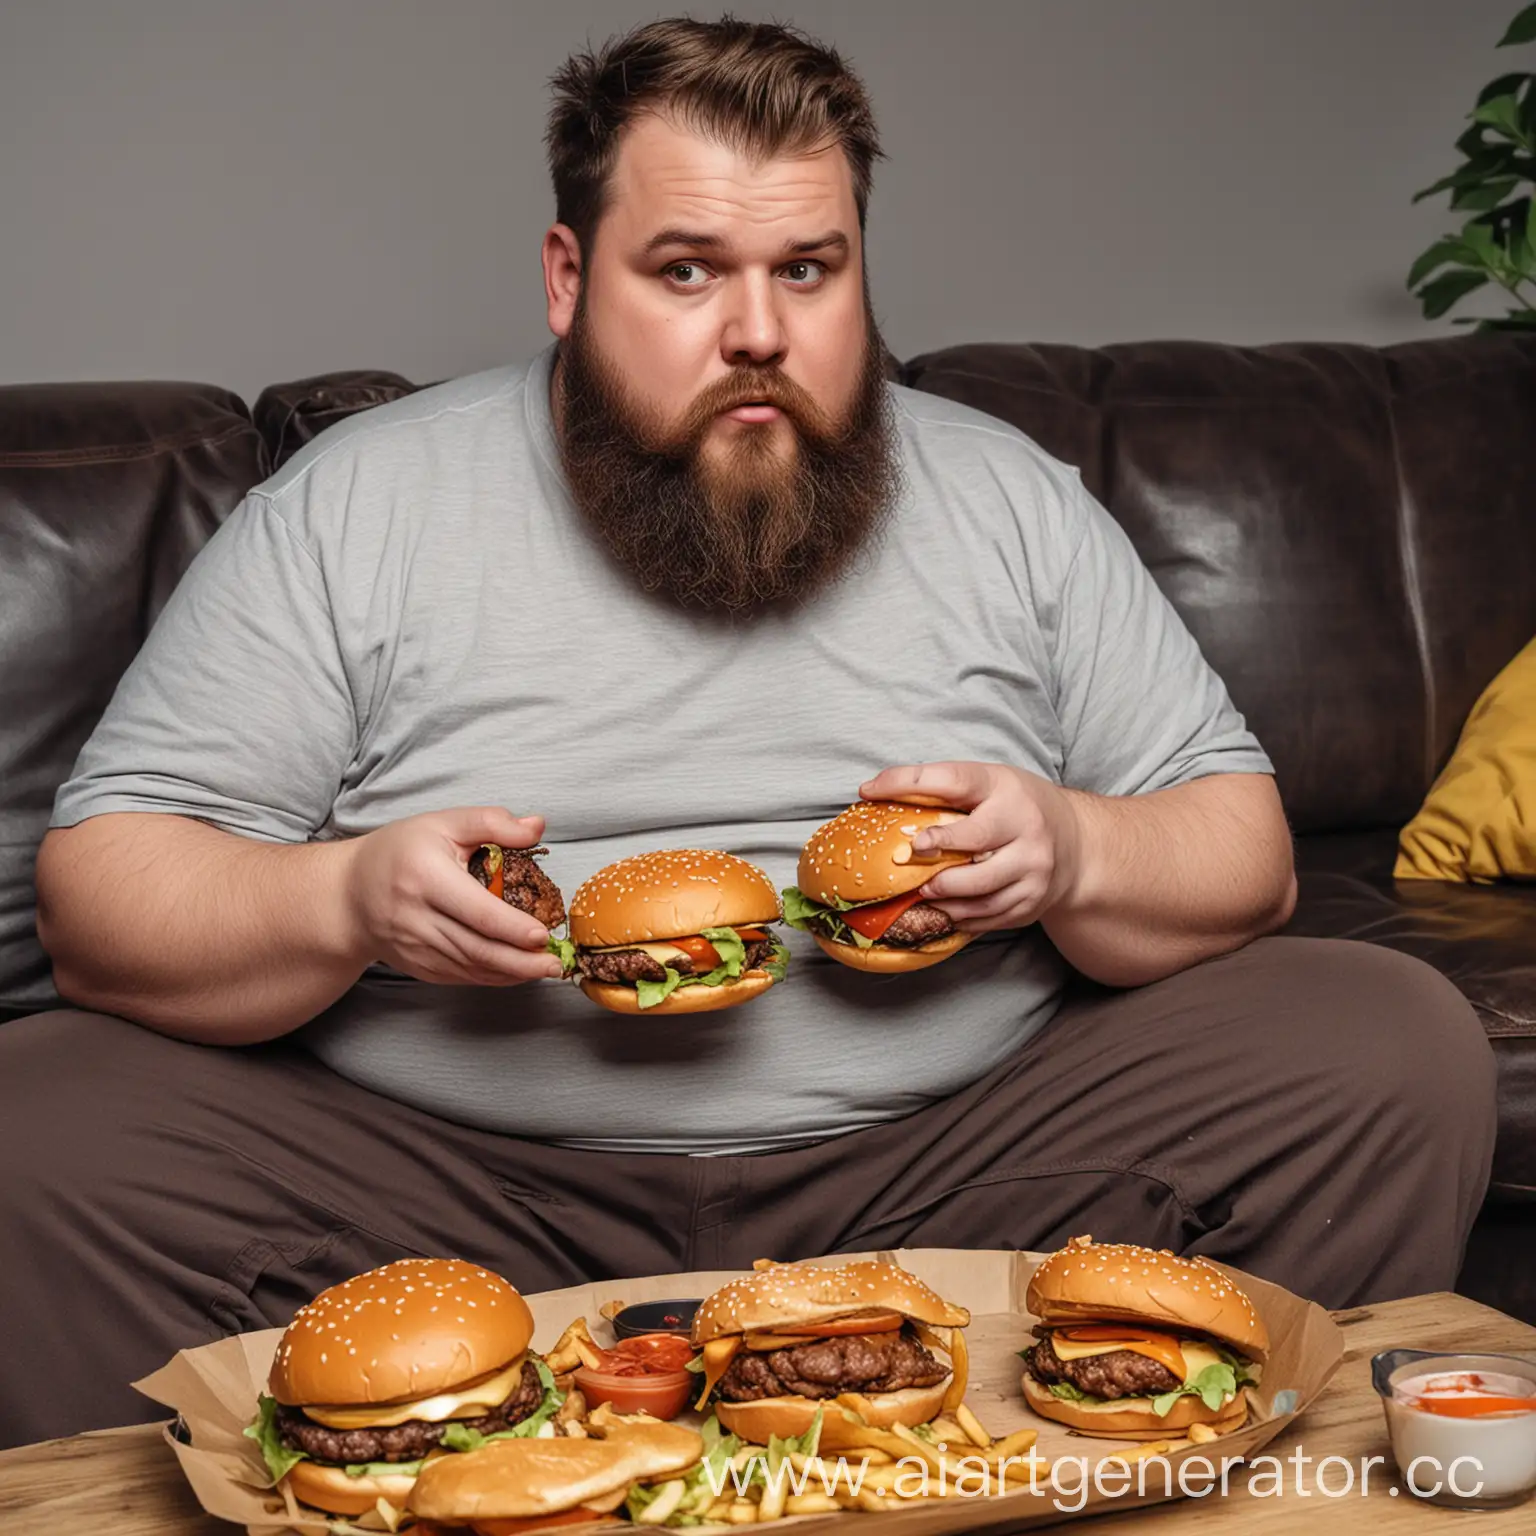 Man-Enjoying-Burgers-While-Gaming-on-Couch